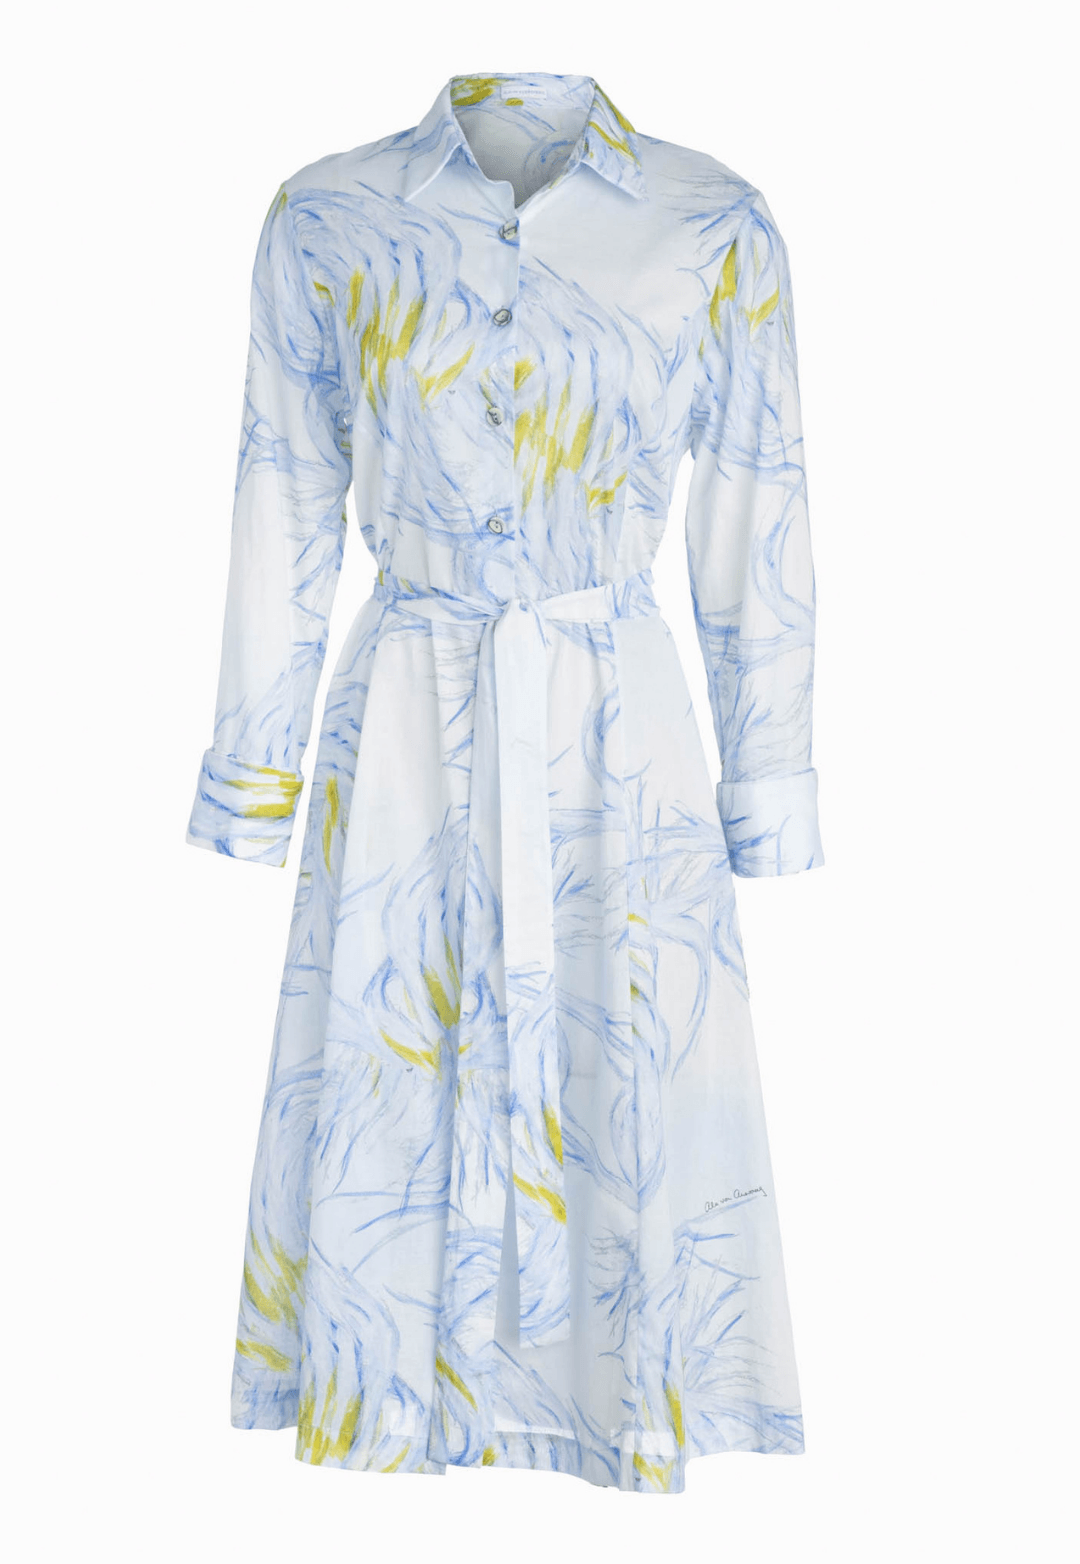 Model wearing short belted cotton shirt dress with yellow and blue feather print